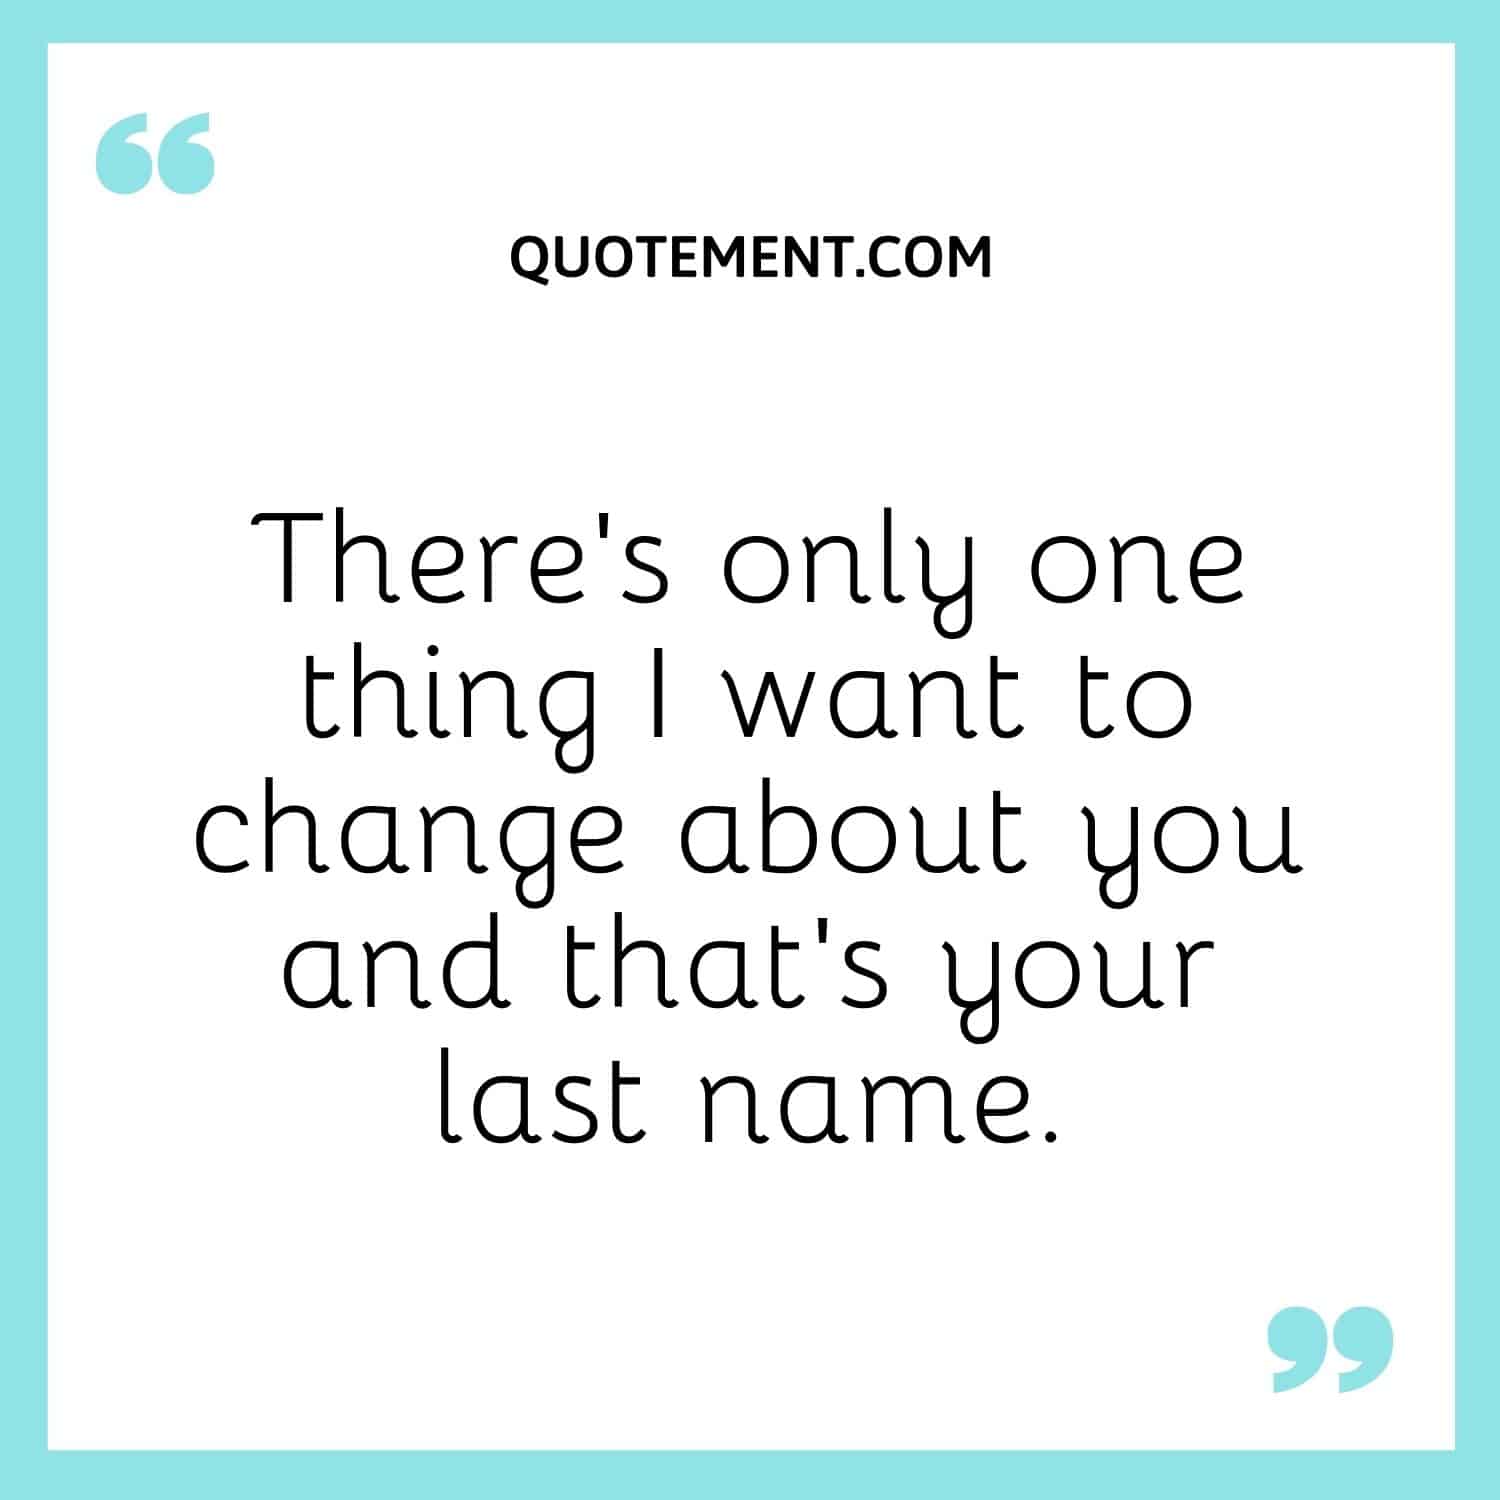 There’s only one thing I want to change about you and that’s your last name